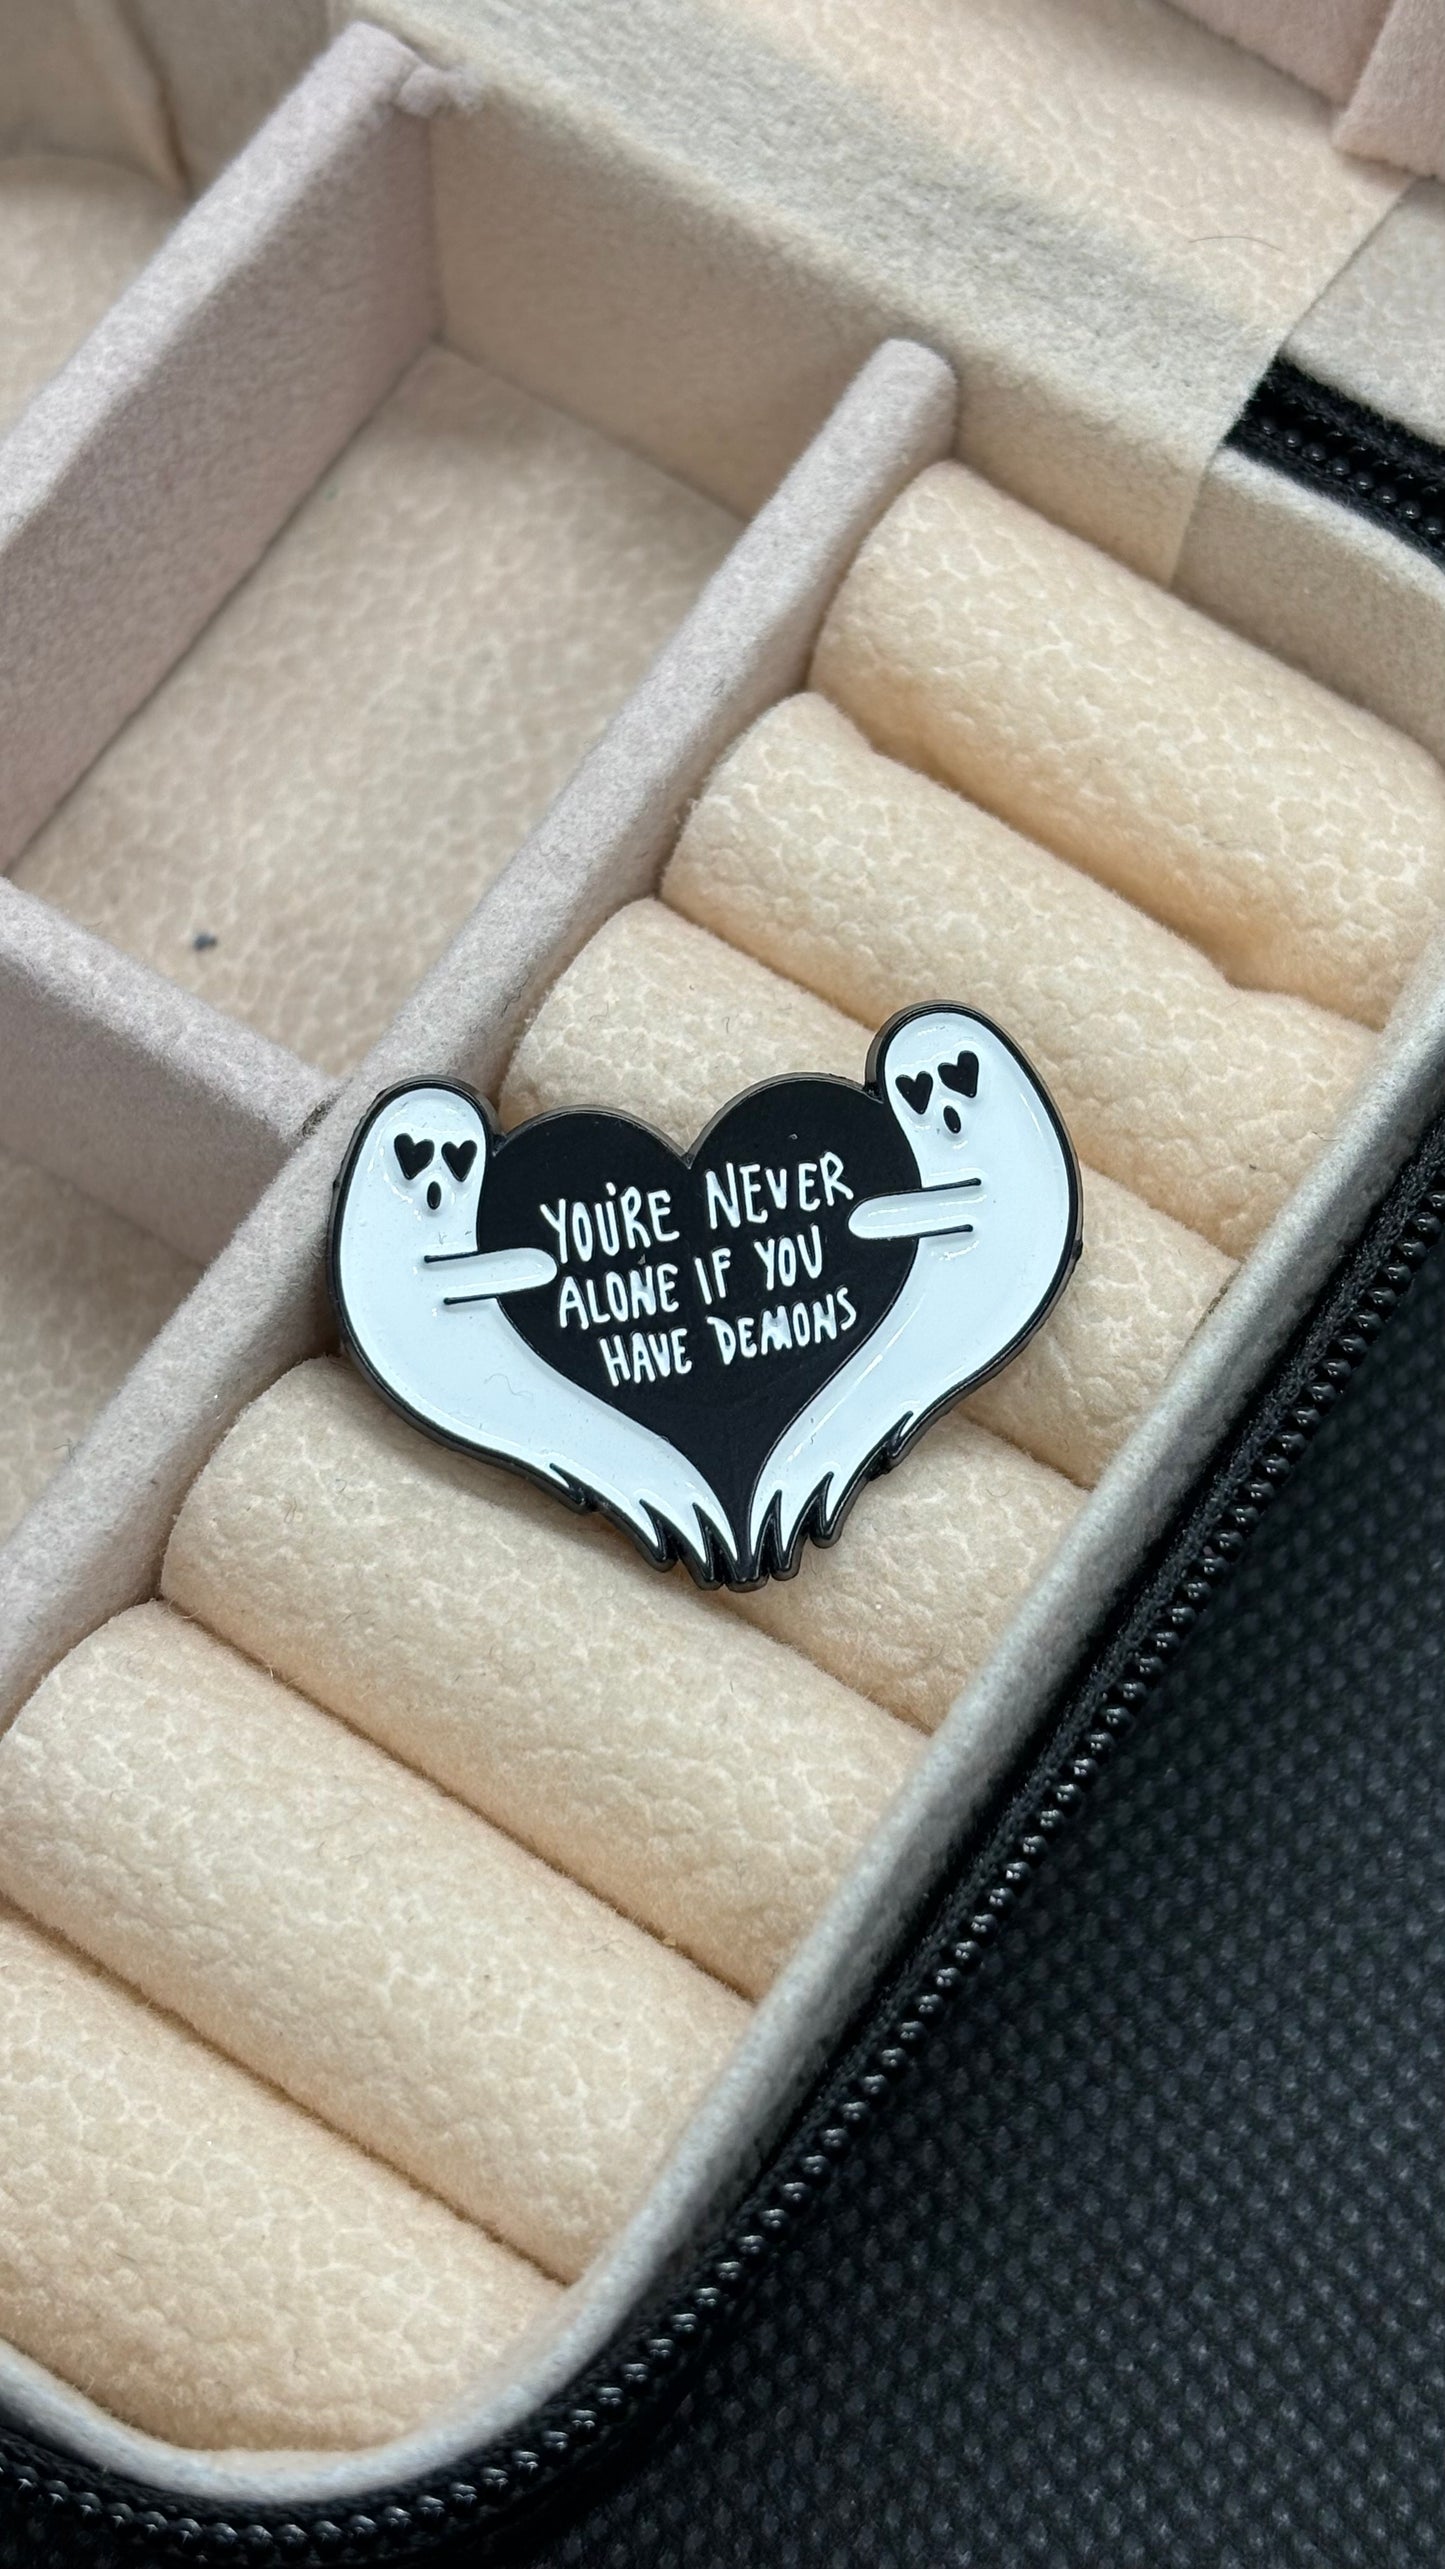 Pin “You’re never alone if you have demons’’